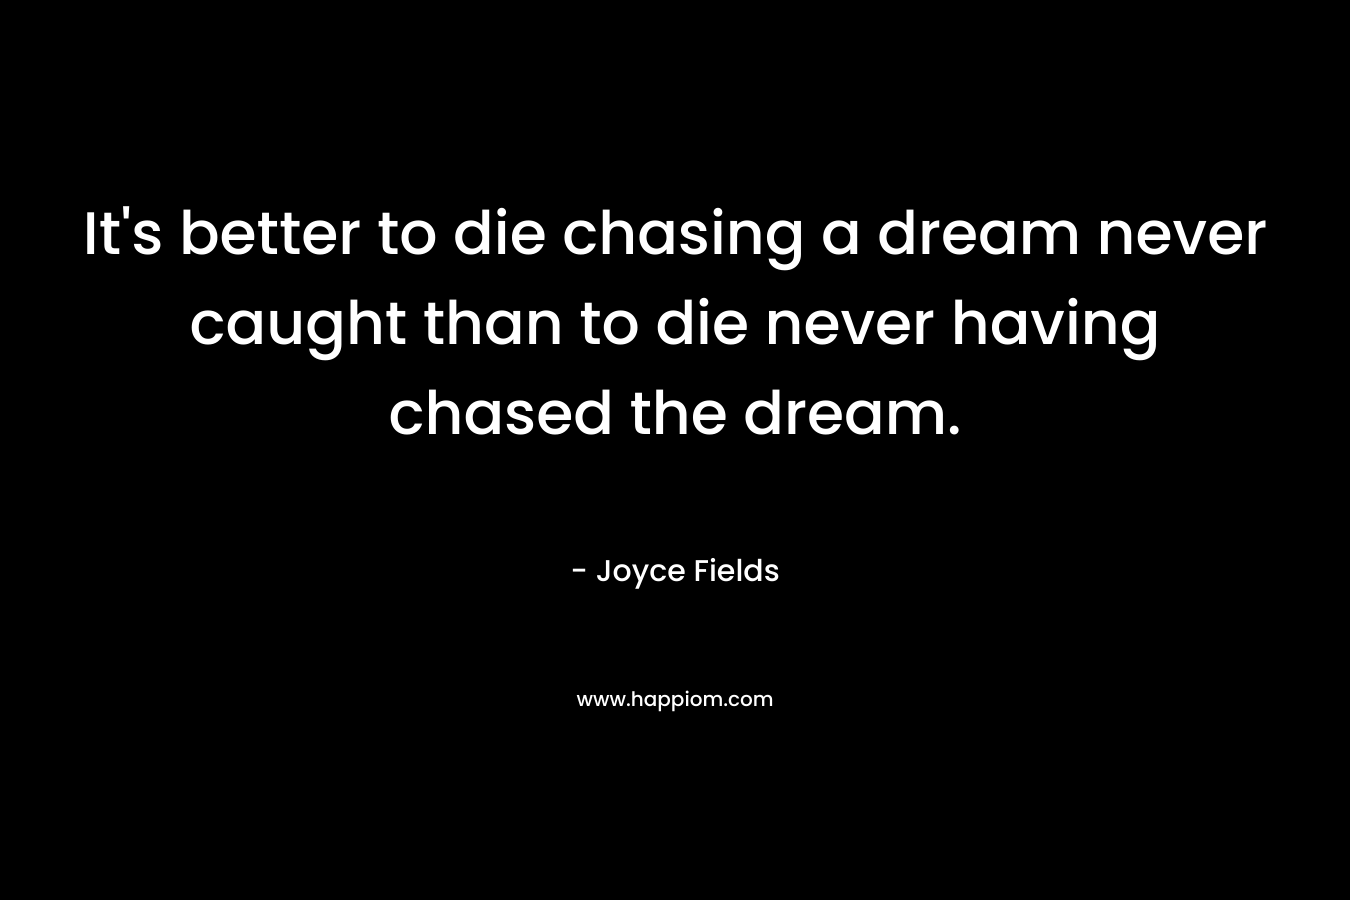 It’s better to die chasing a dream never caught than to die never having chased the dream. – Joyce Fields